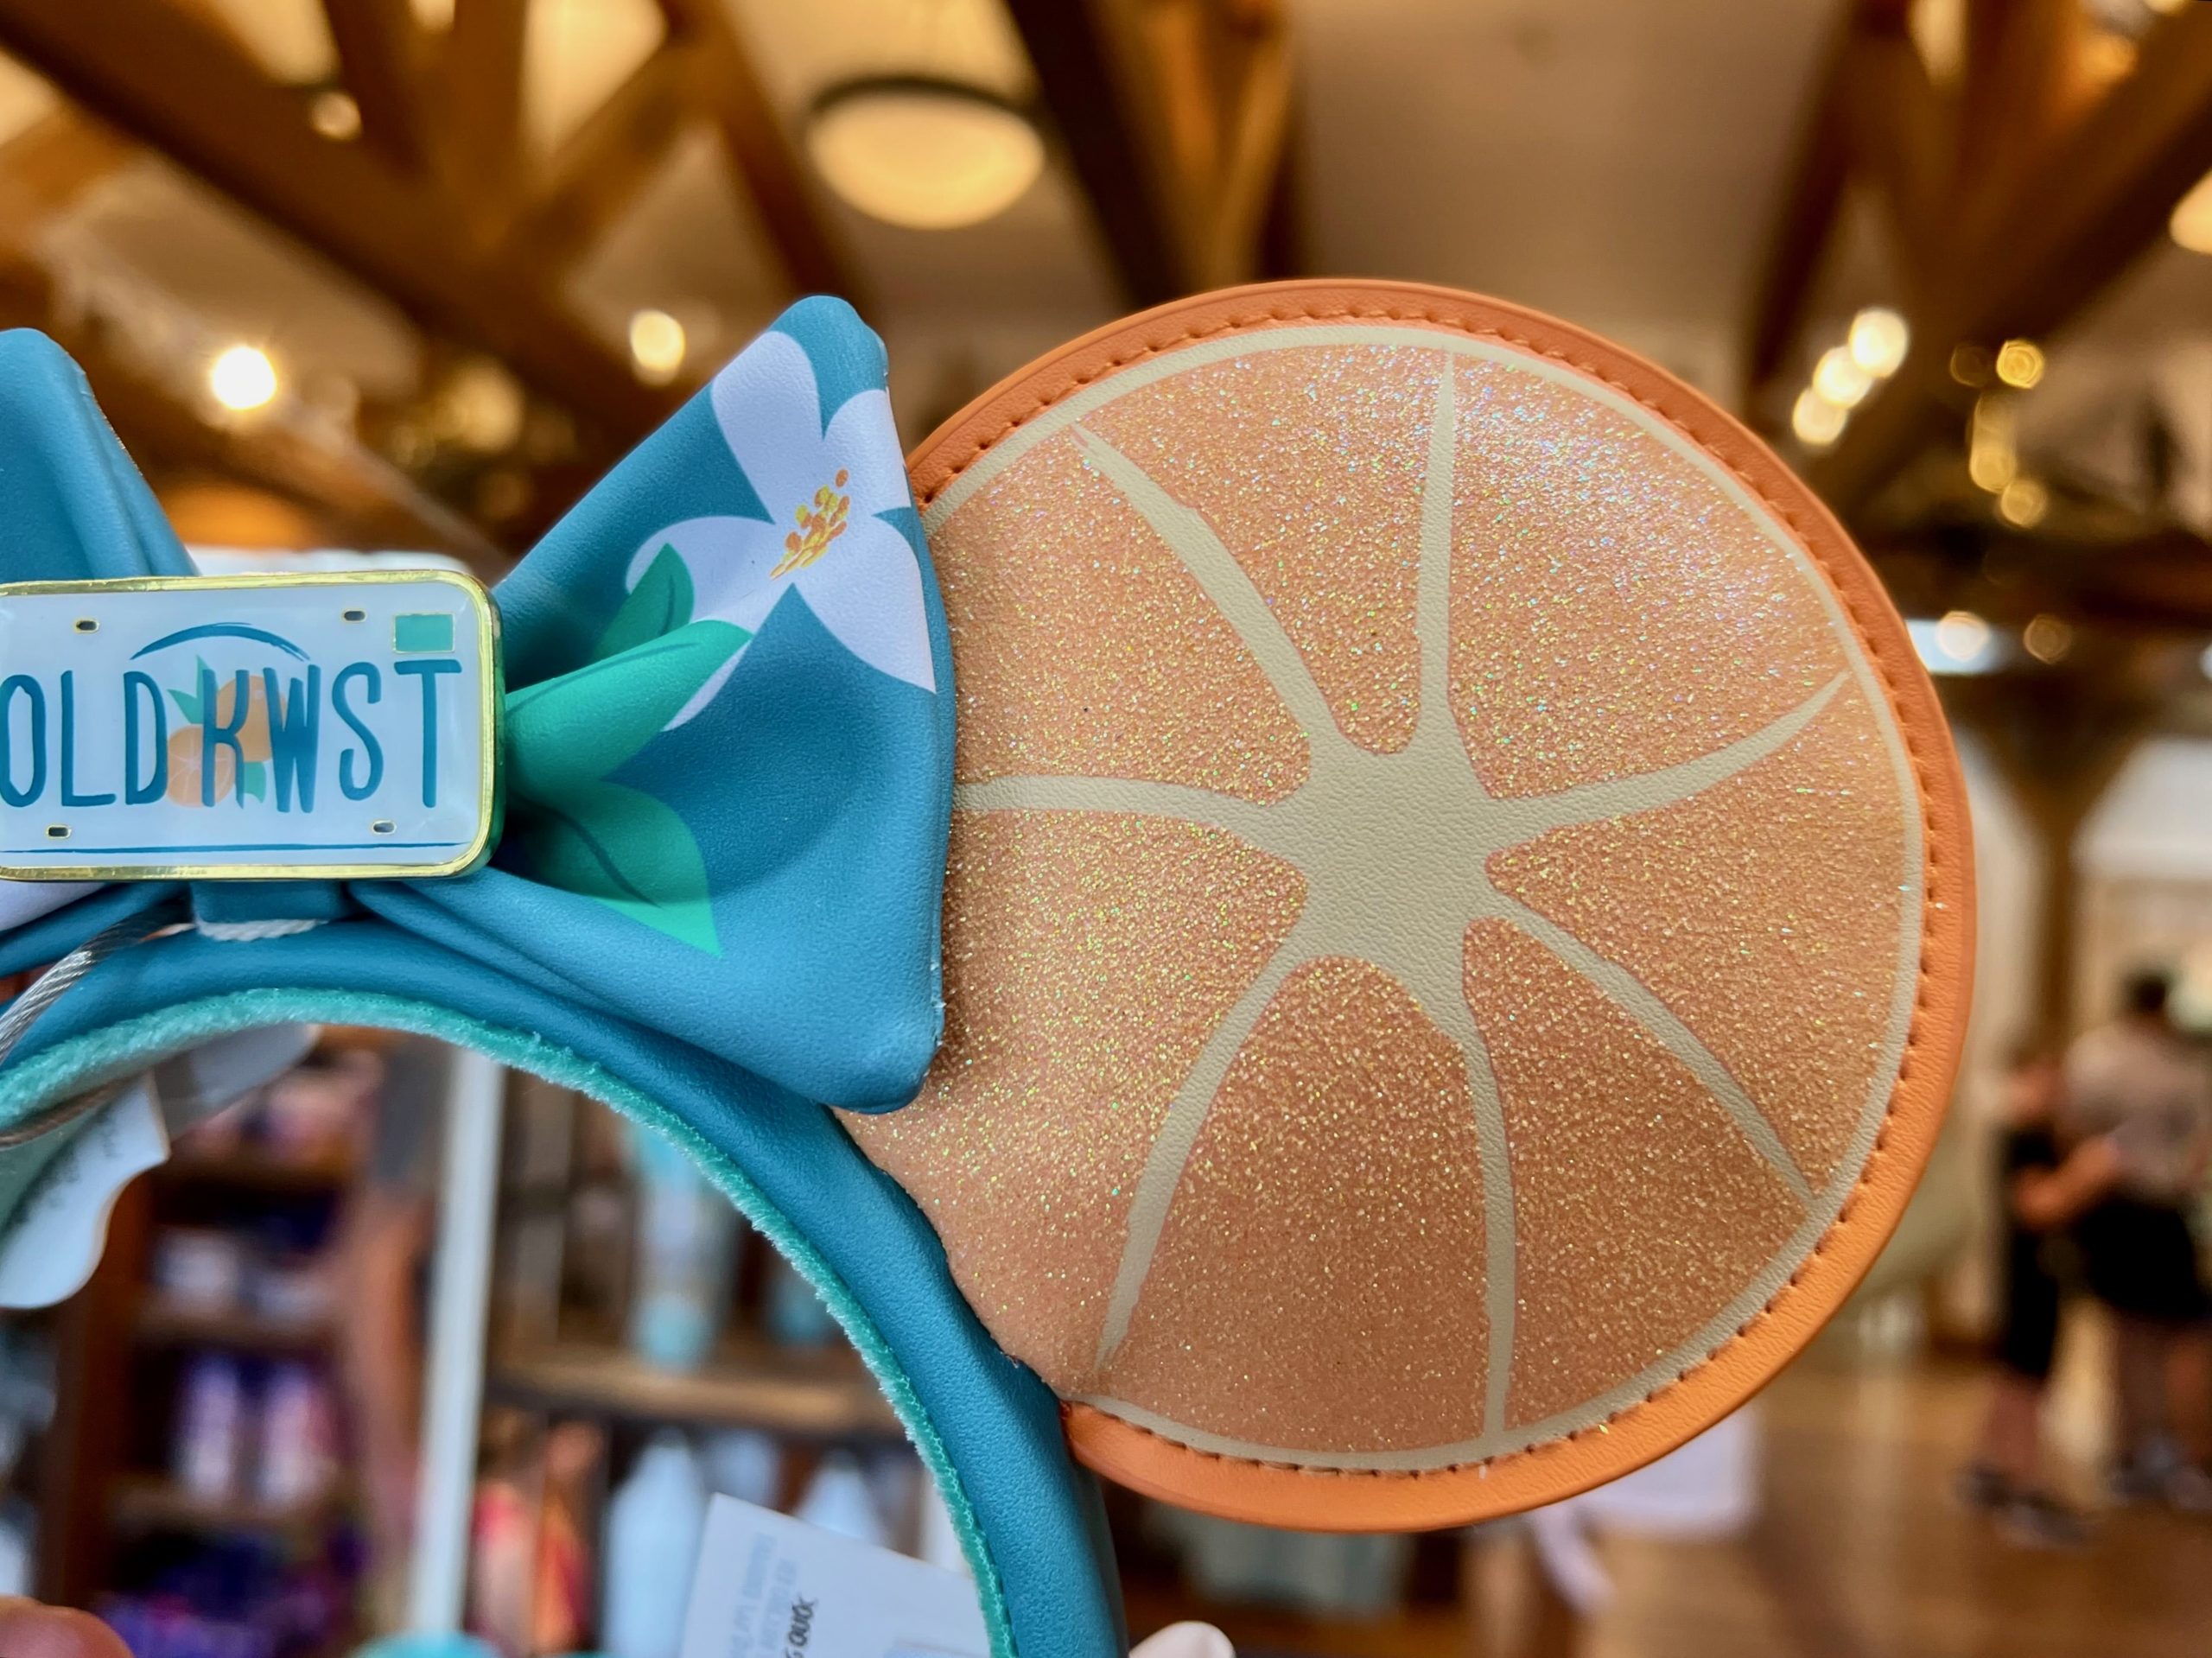 Old Key West Orange Scented Minnie Ears Close Up